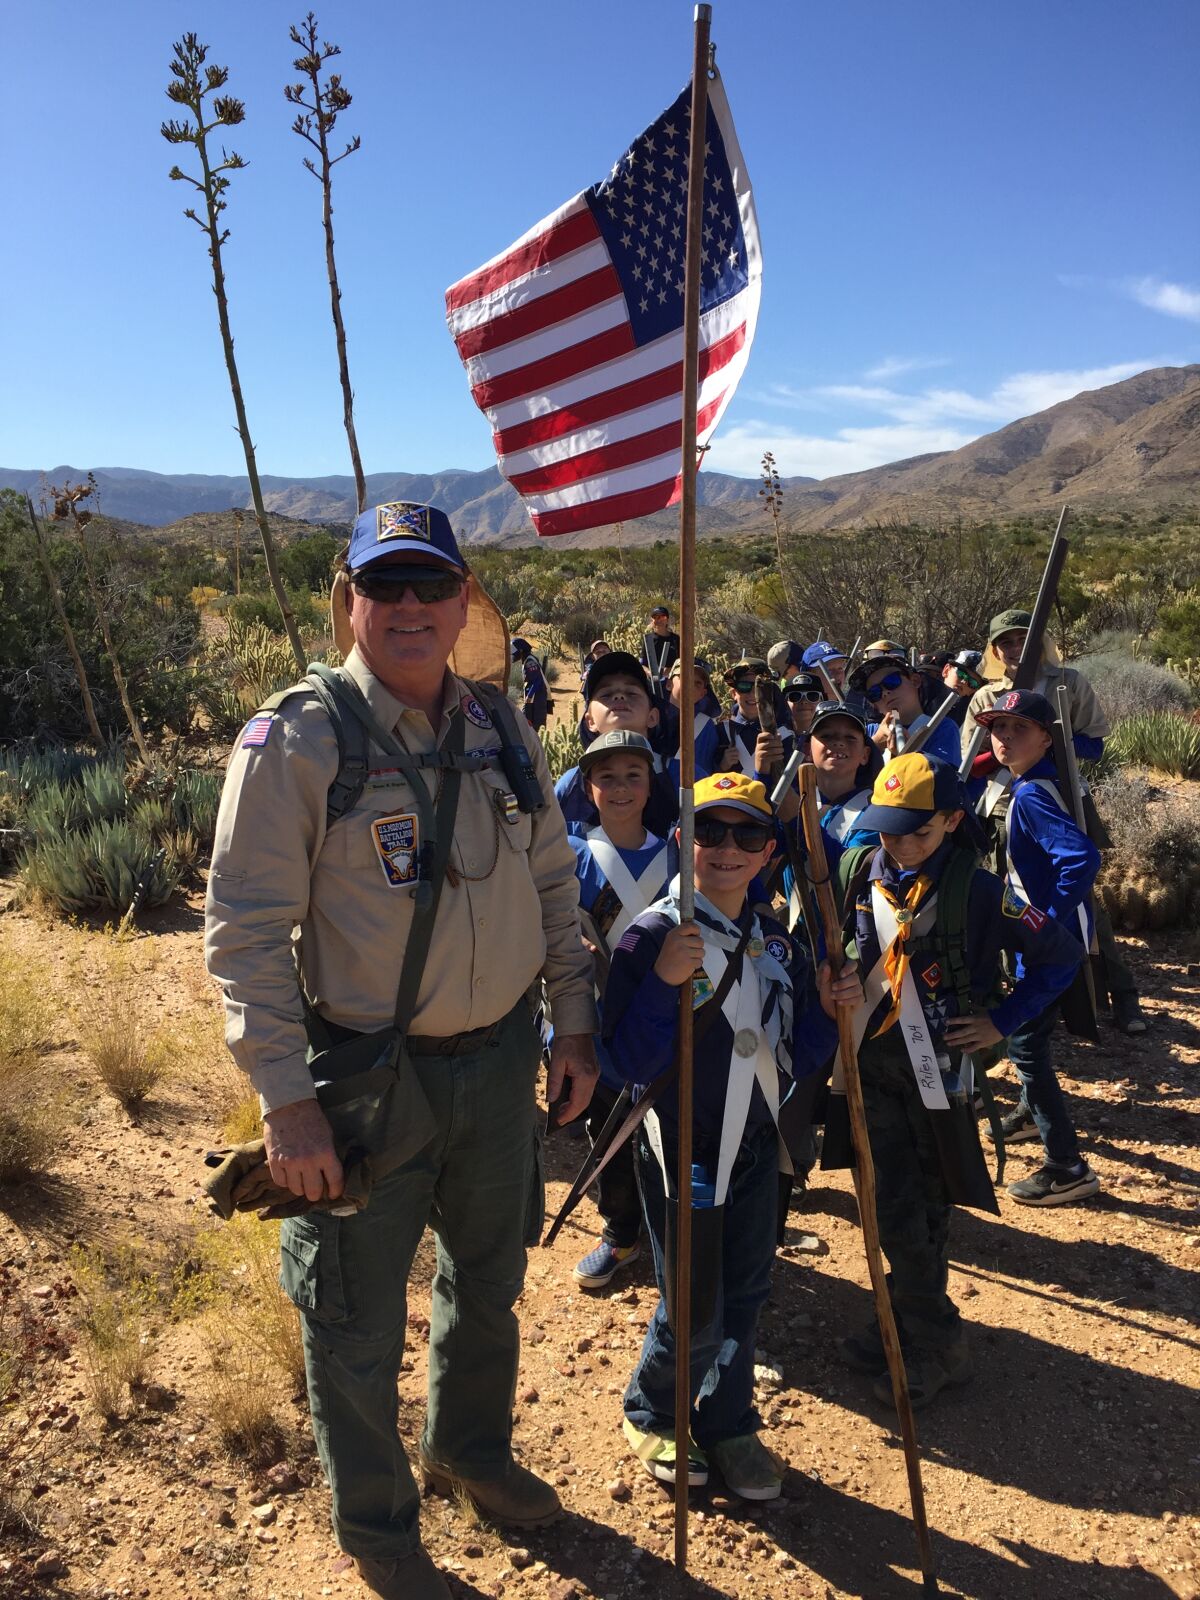 Scoutmaster Duane Neyens, left, leads more than 30 Cub Scouts on a five-mile hike to earn the Mormon Battalion Trail High Adventure Award near Julian on Oct. 19.